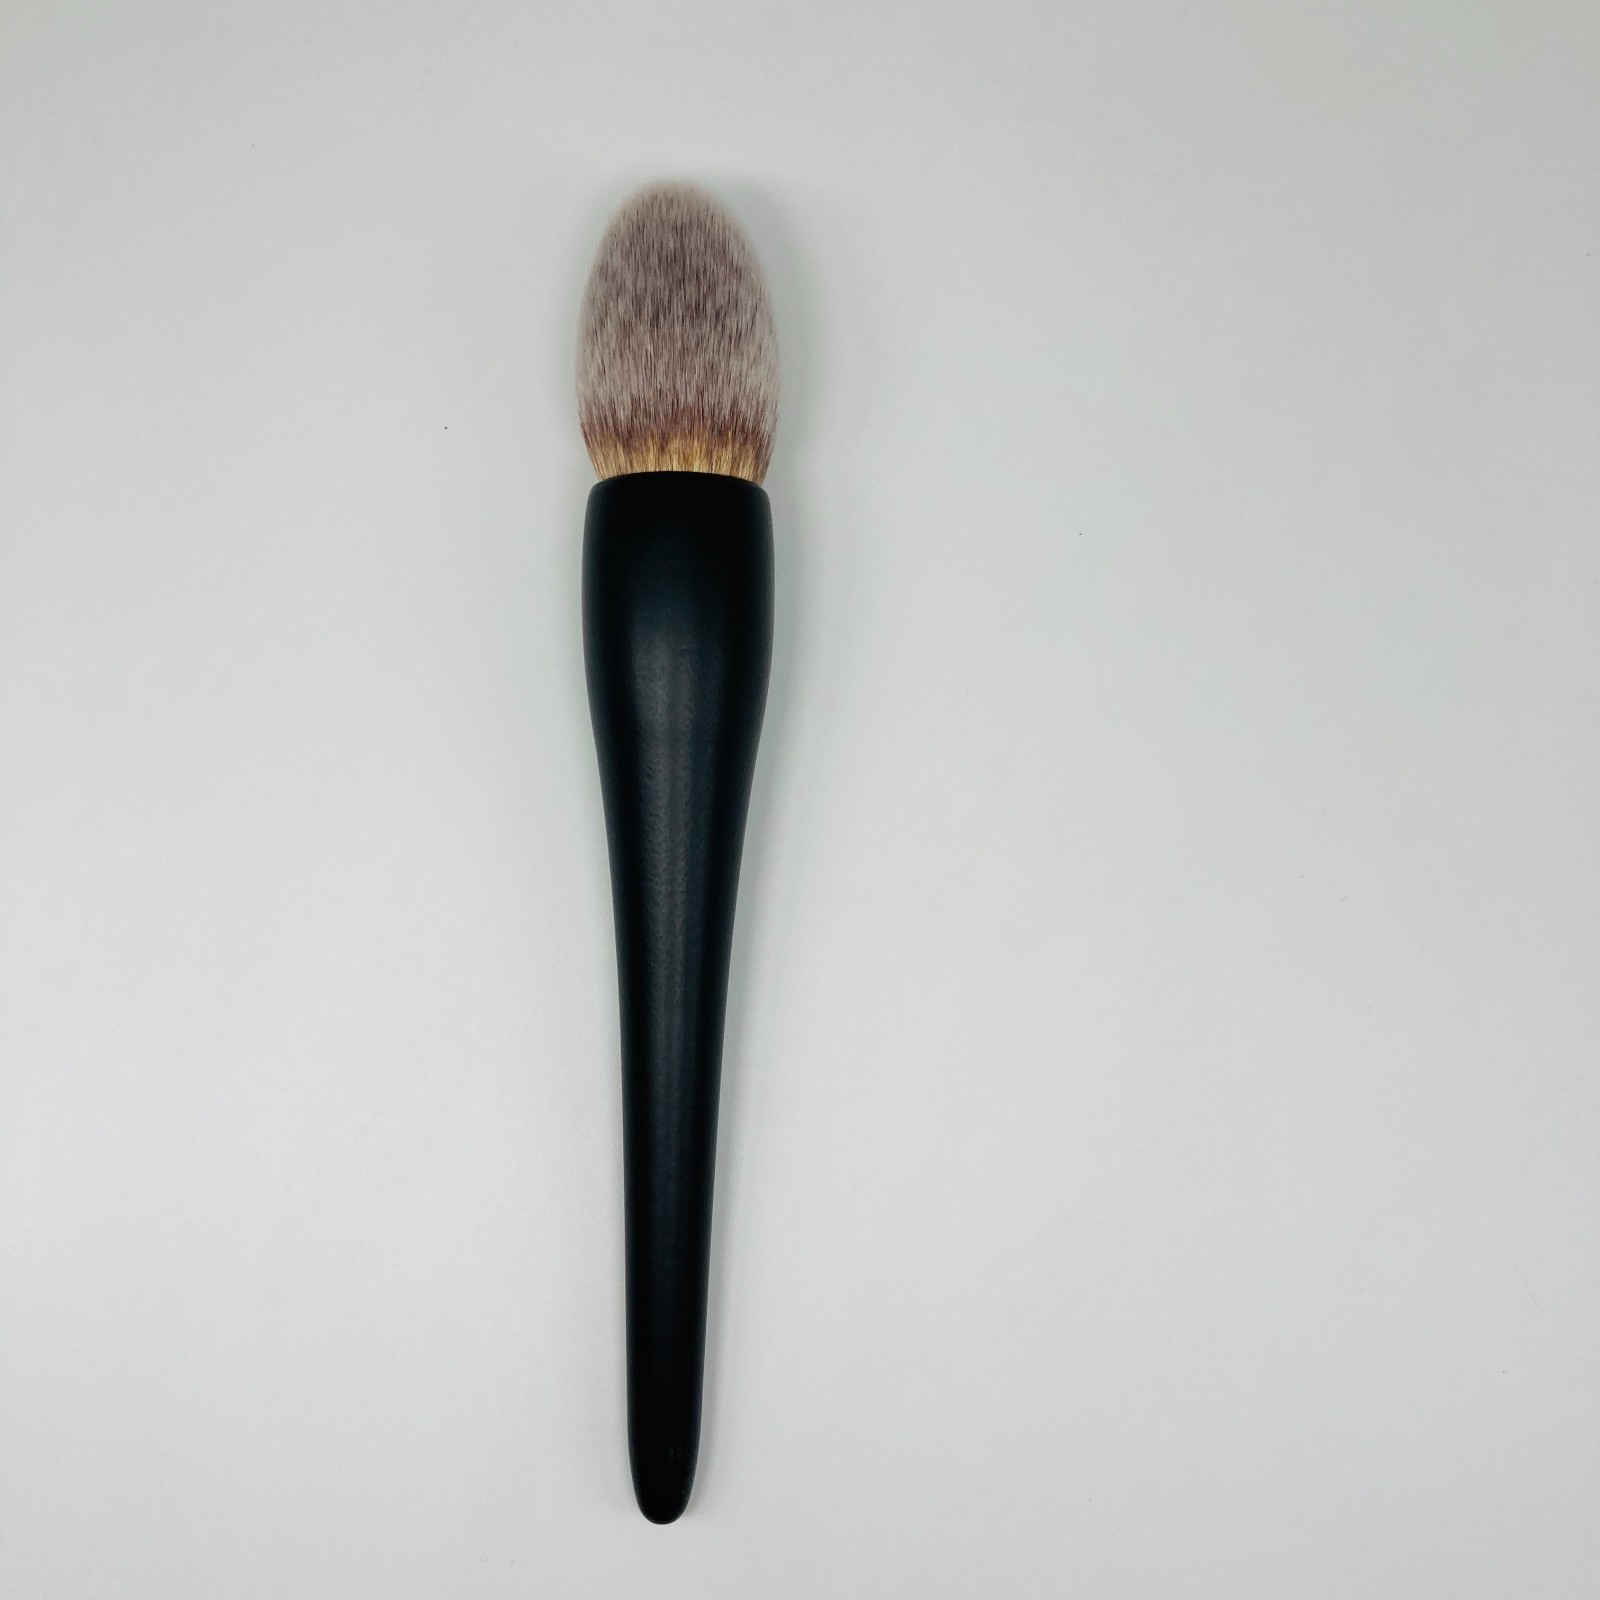 Suprabeauty promotional new foundation brush series on sale-1